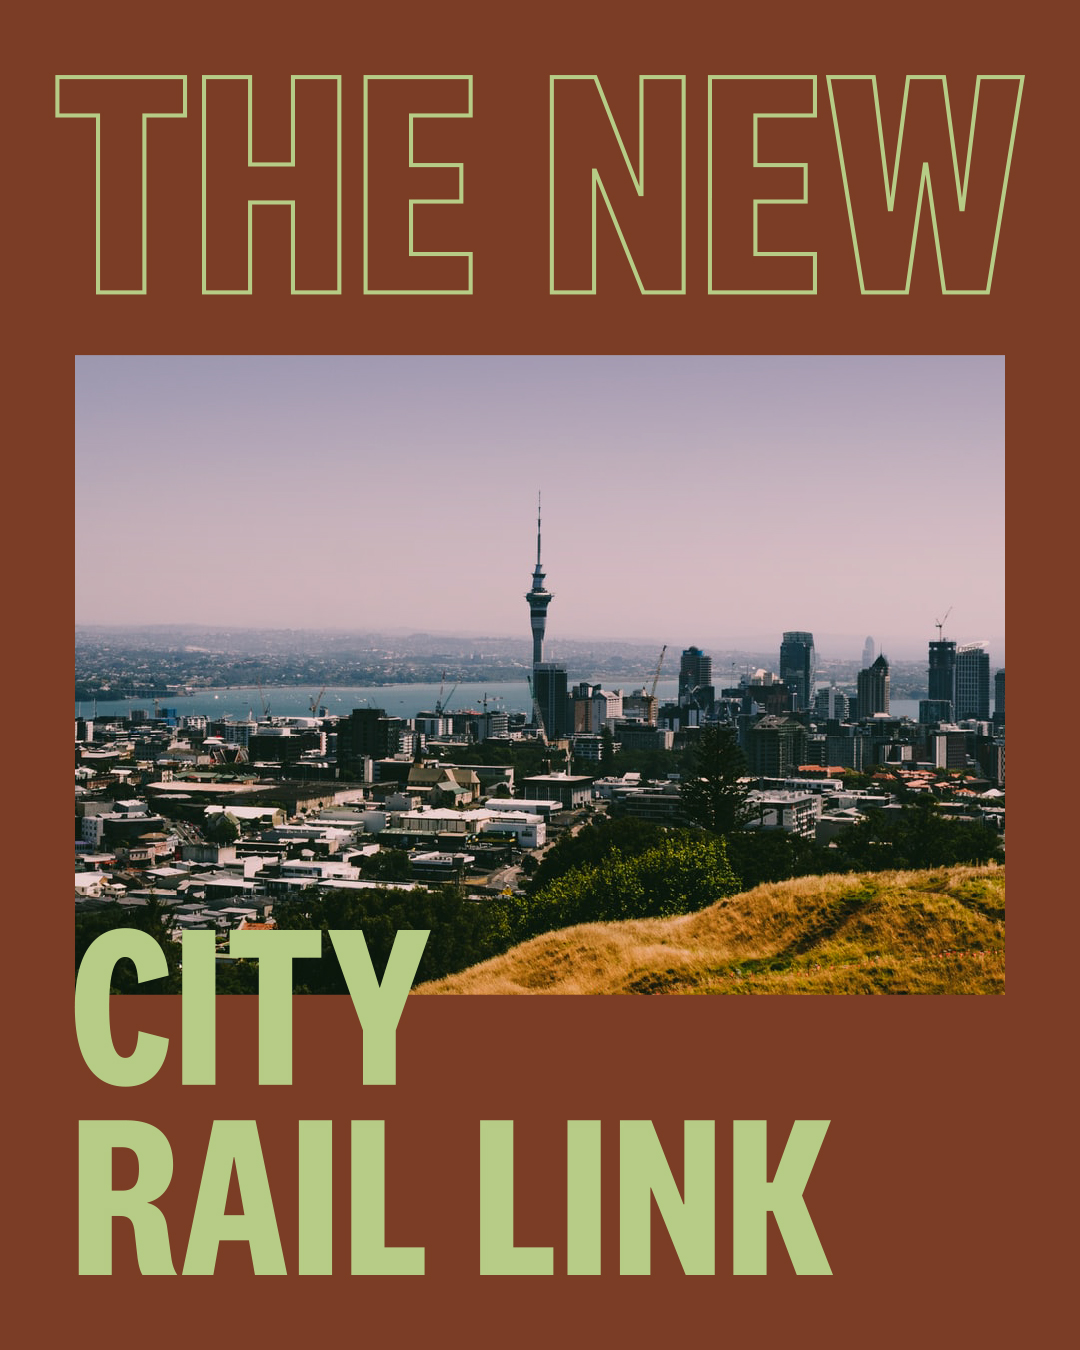 The new city rail link will get twice as many people within half an hour of the city centre.